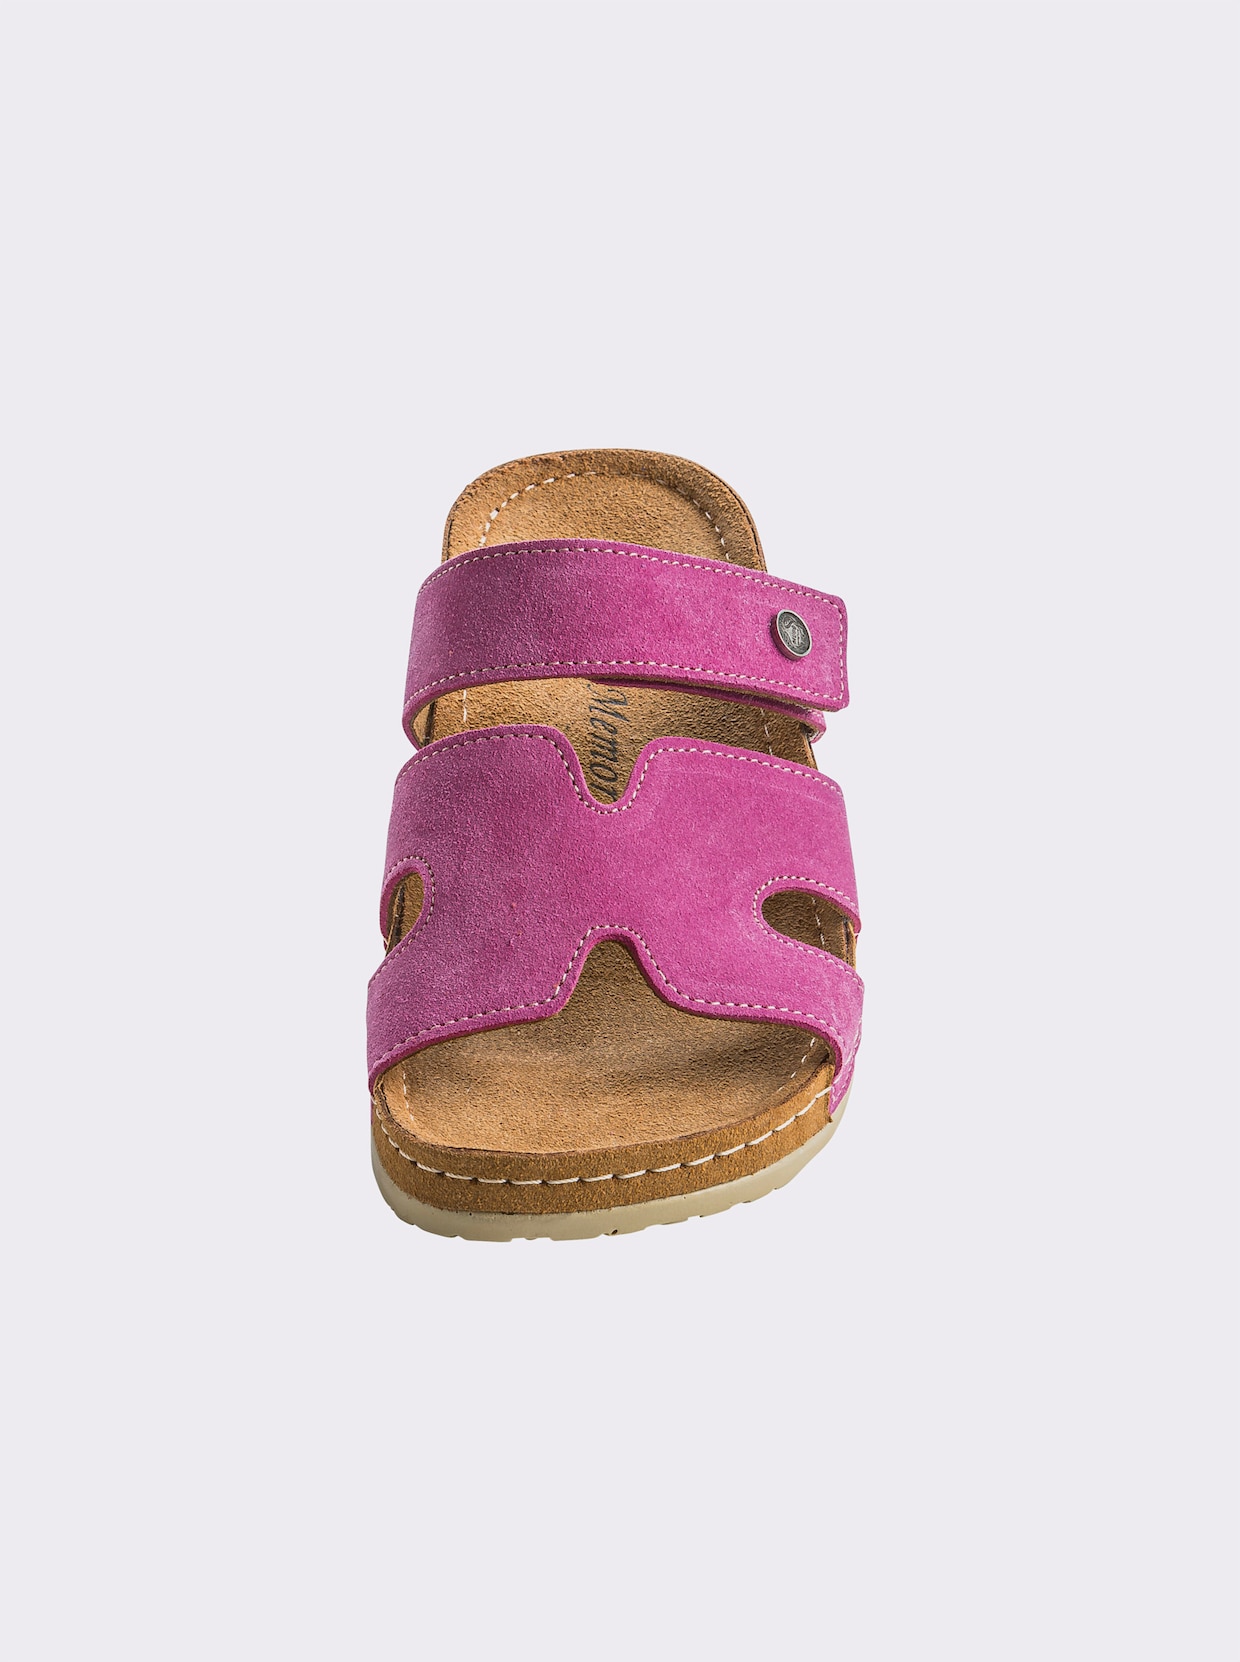 Mubb slippers - pink